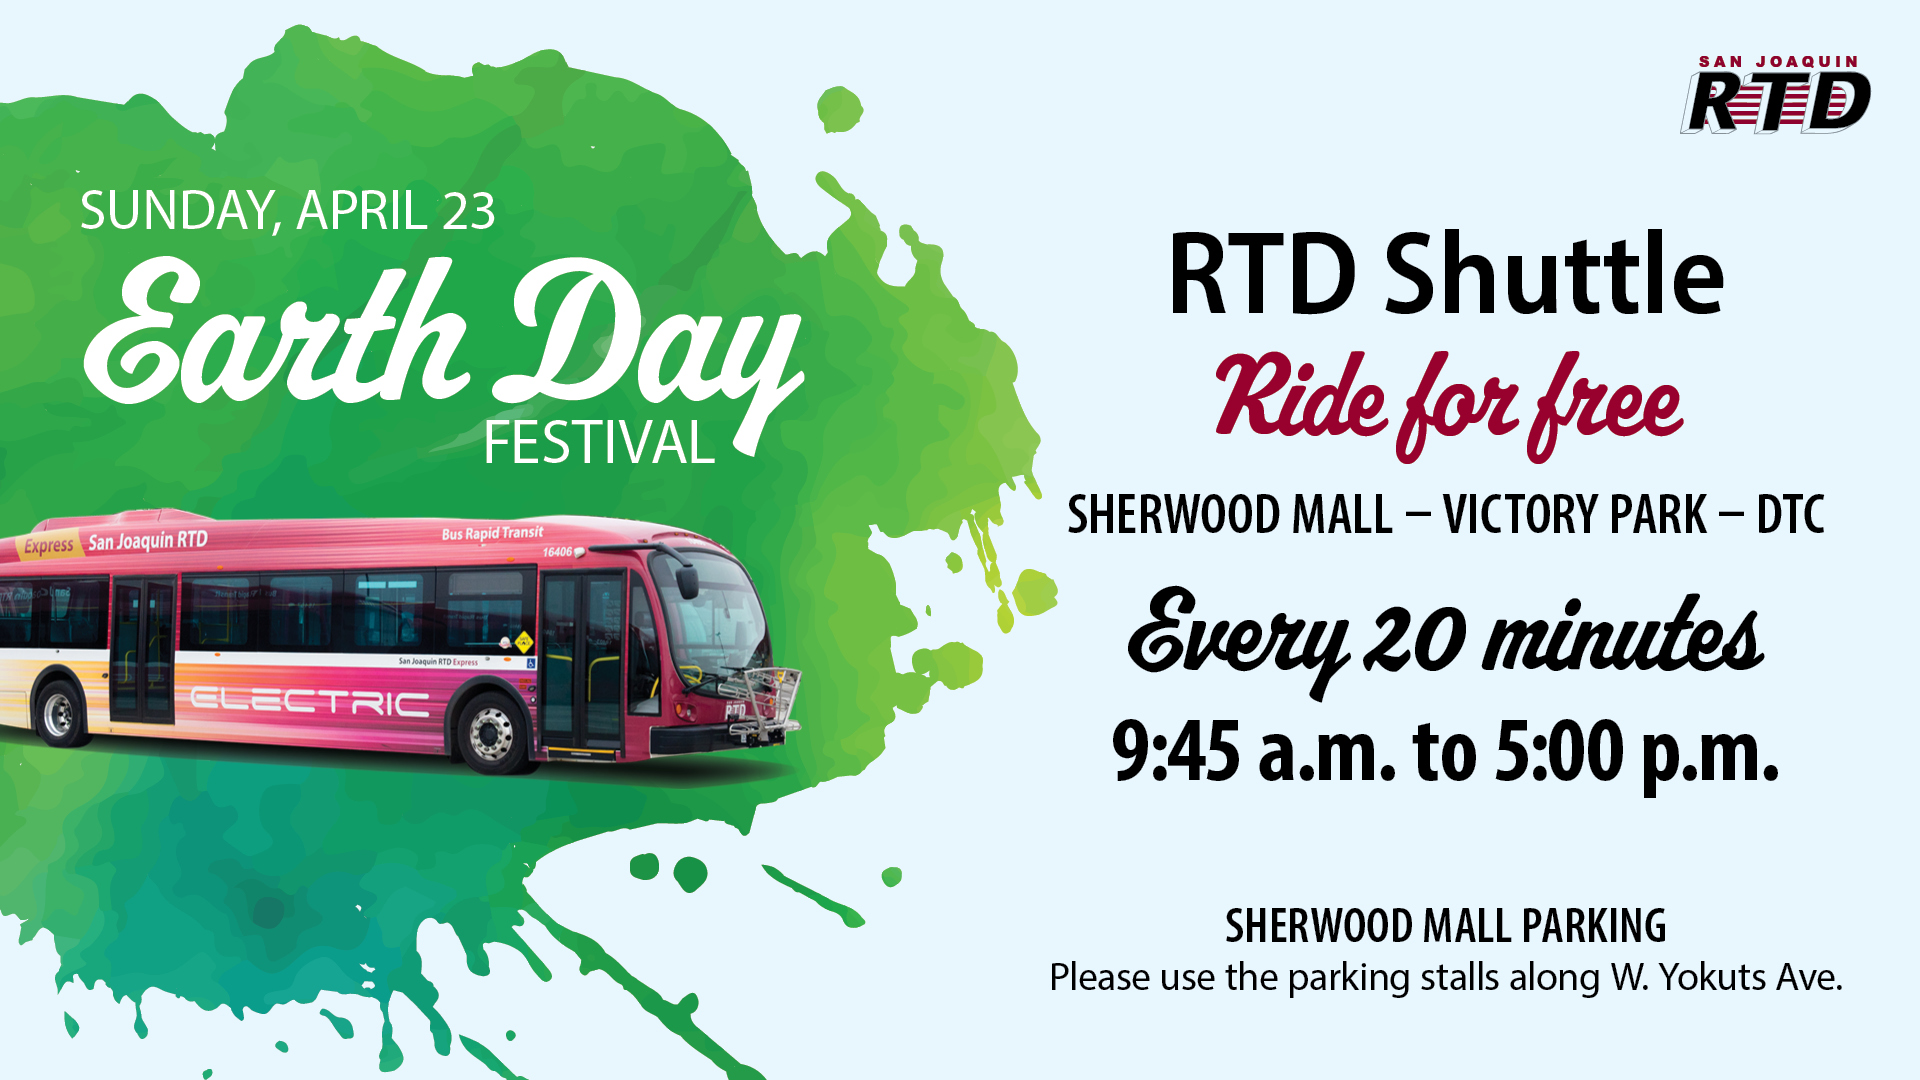 RTD Shuttle Earth Day Festival Ride for Free Sherwood Mall - Victory Park - DTC Every 20 minutes 9:45 a.m. to 5:00 p.m. Sherwood Mall Parking Please use the parking stalls along W. Yokuts Ave.